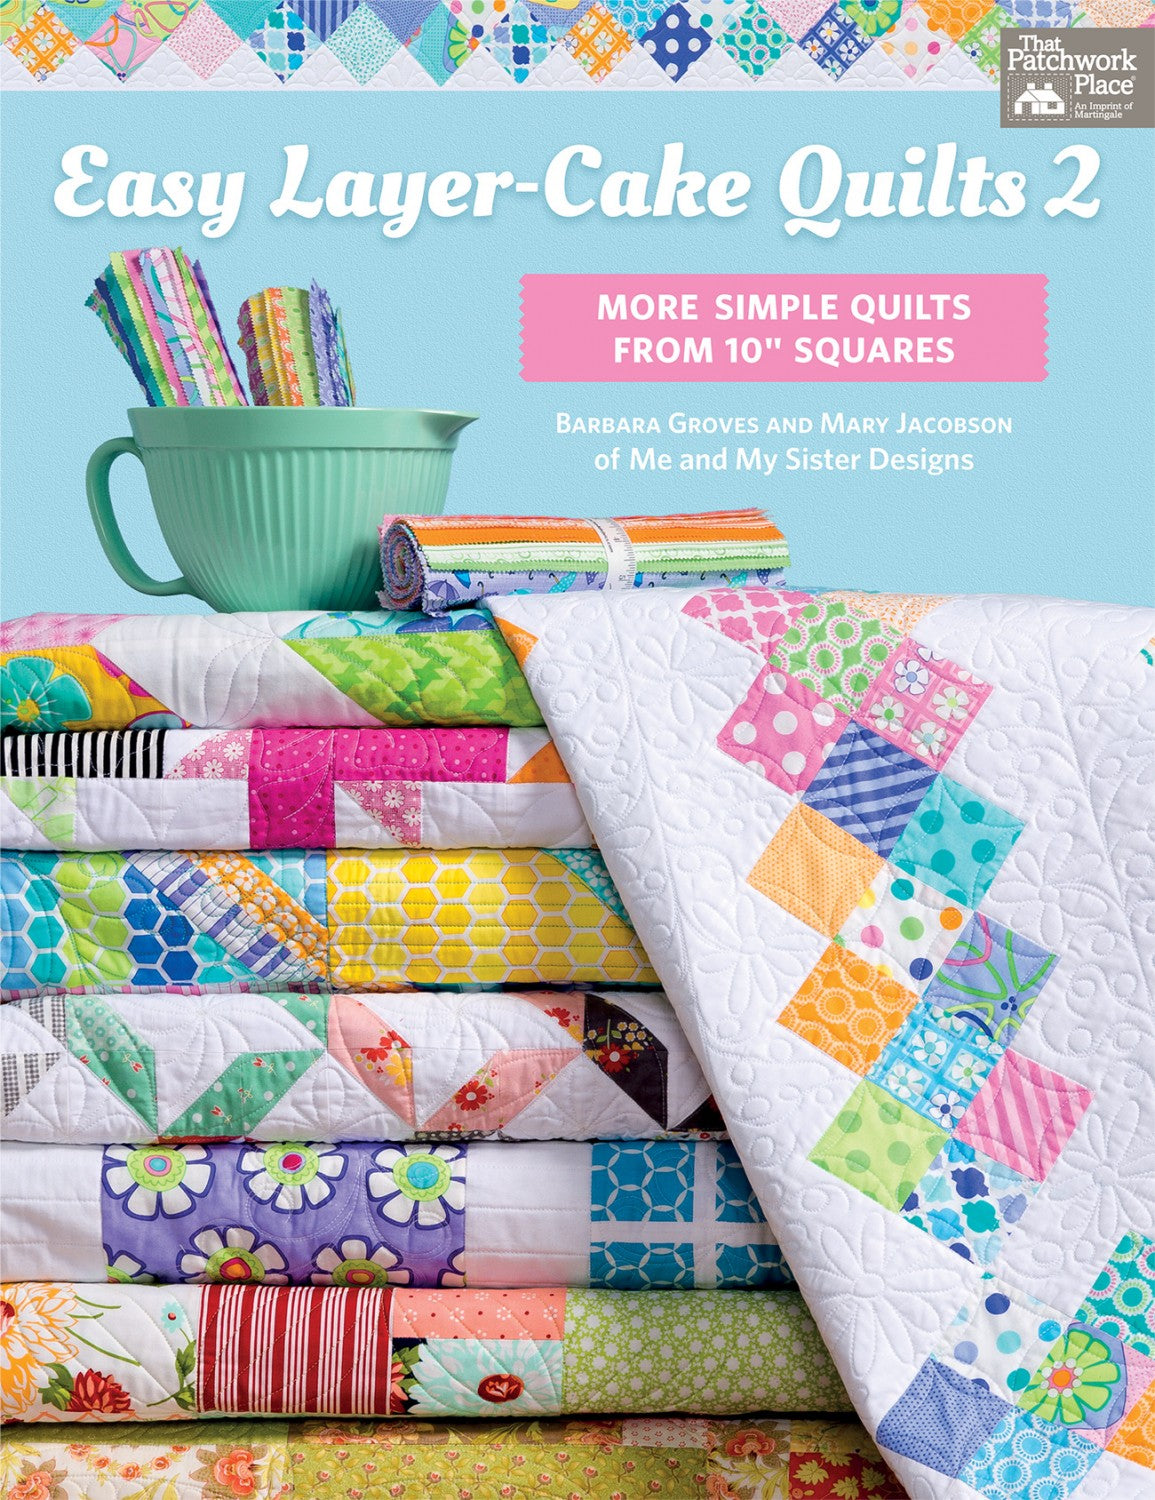 Easy Layer-Cake Quilts 2 By Barbara Groves, and Mary Jacobson.